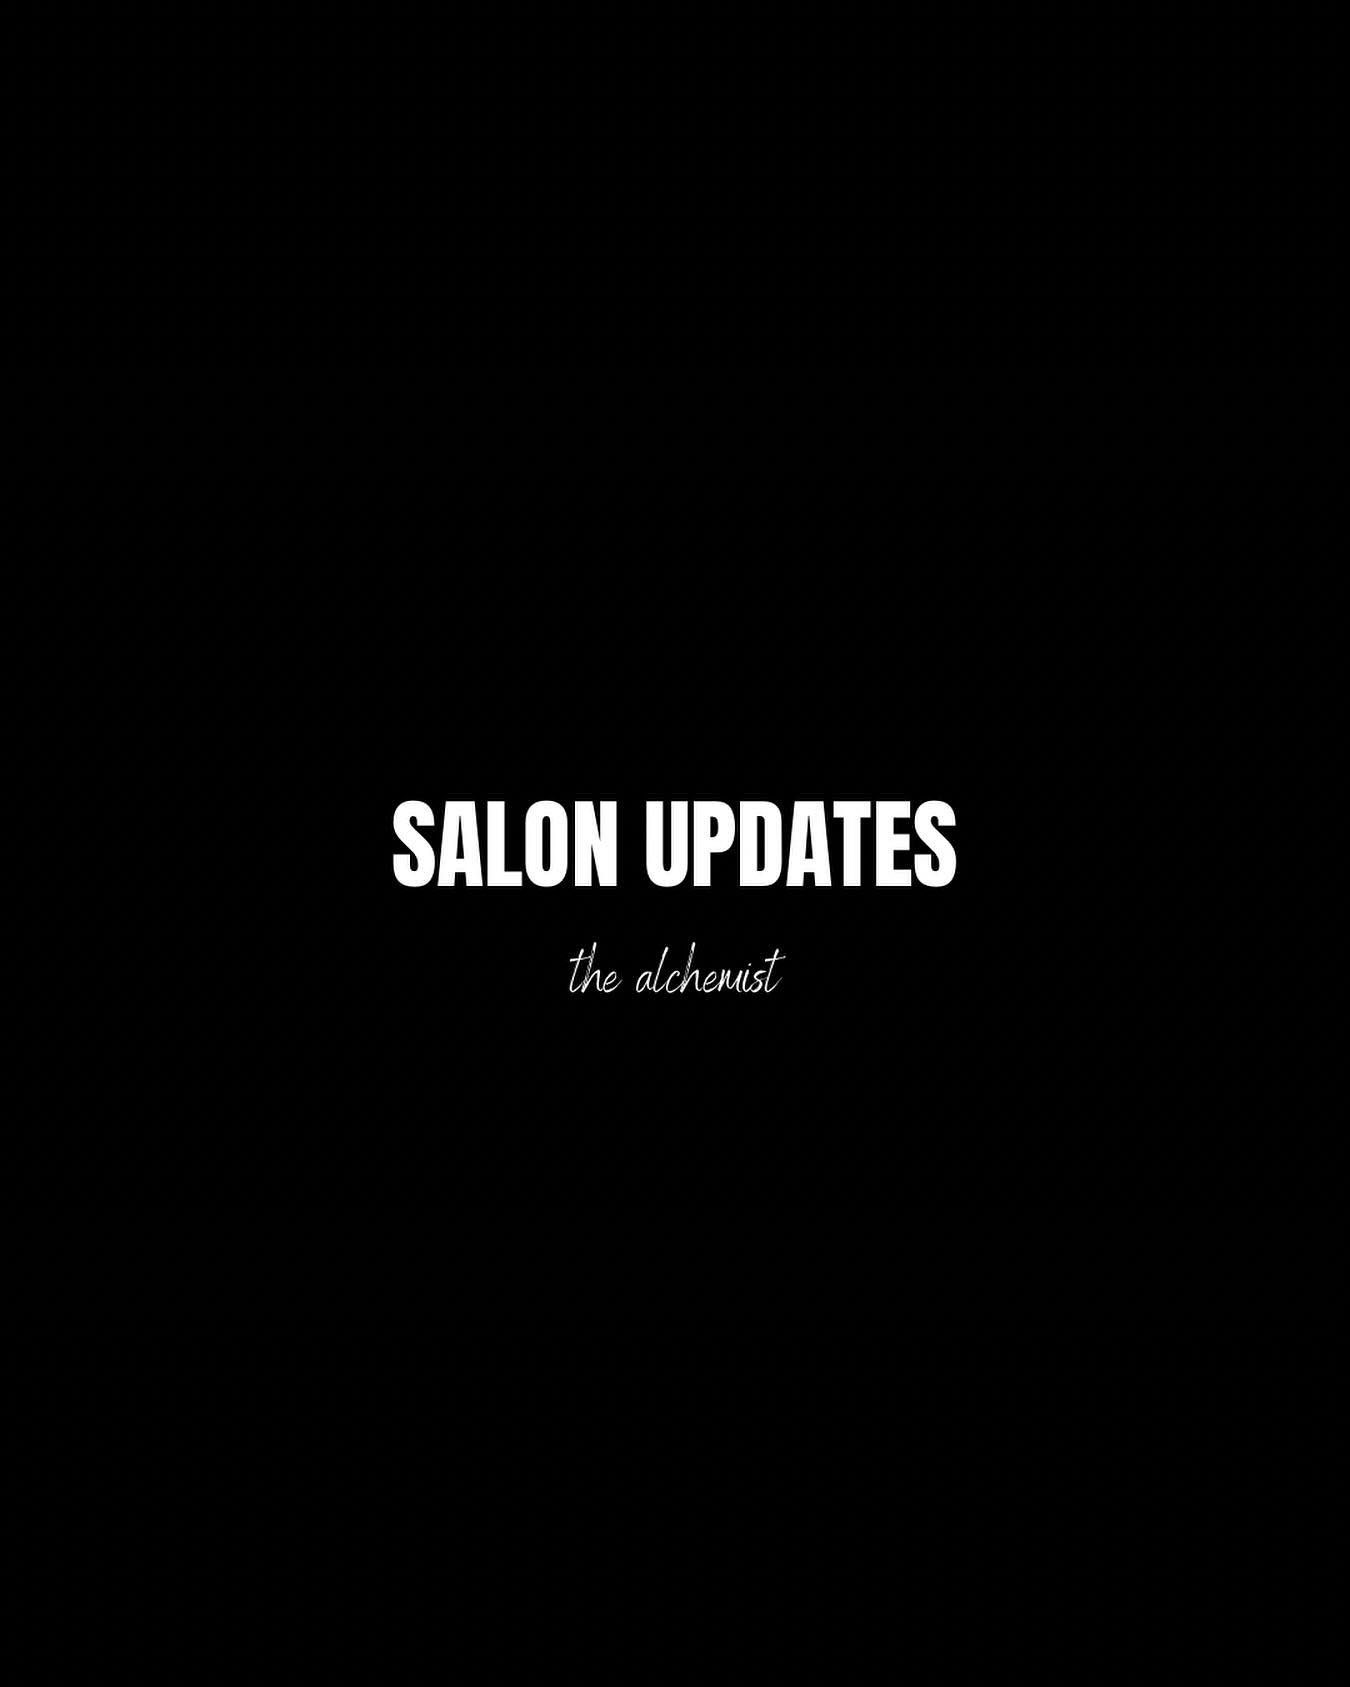 Some big updates are coming at The Alchemist. I&rsquo;m gonna give you the bullet points here! I can&rsquo;t wait to share more with you but I want to make this post digestible sit tight and enjoy!

📍New Location is in salon lofts, Loft 24

9505 142